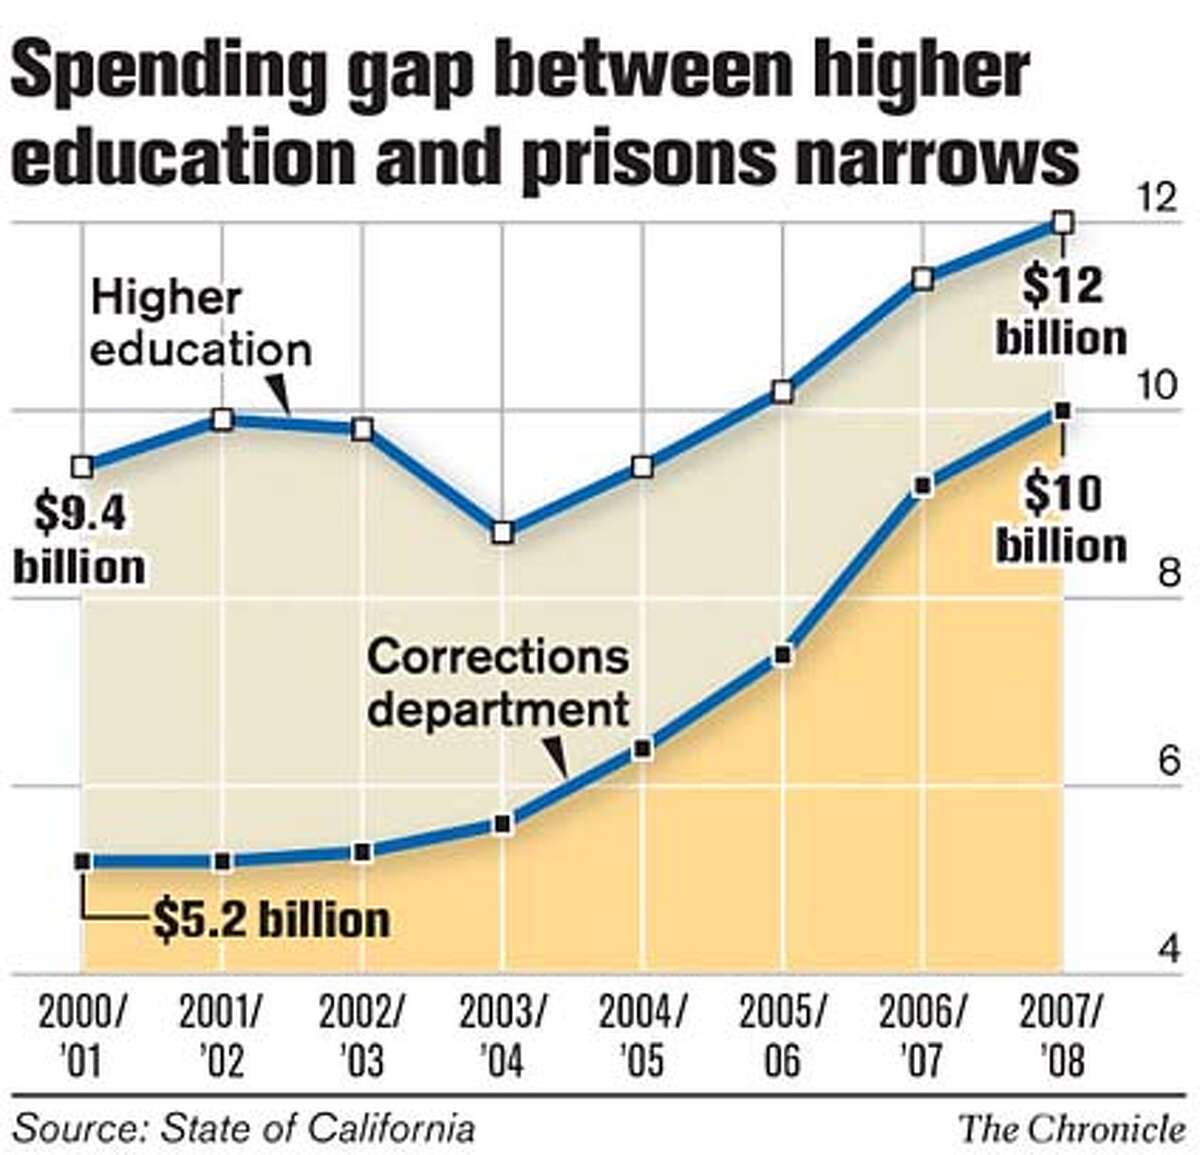 Spending gap between prisons and higher education narrows. Chronicle Graphic